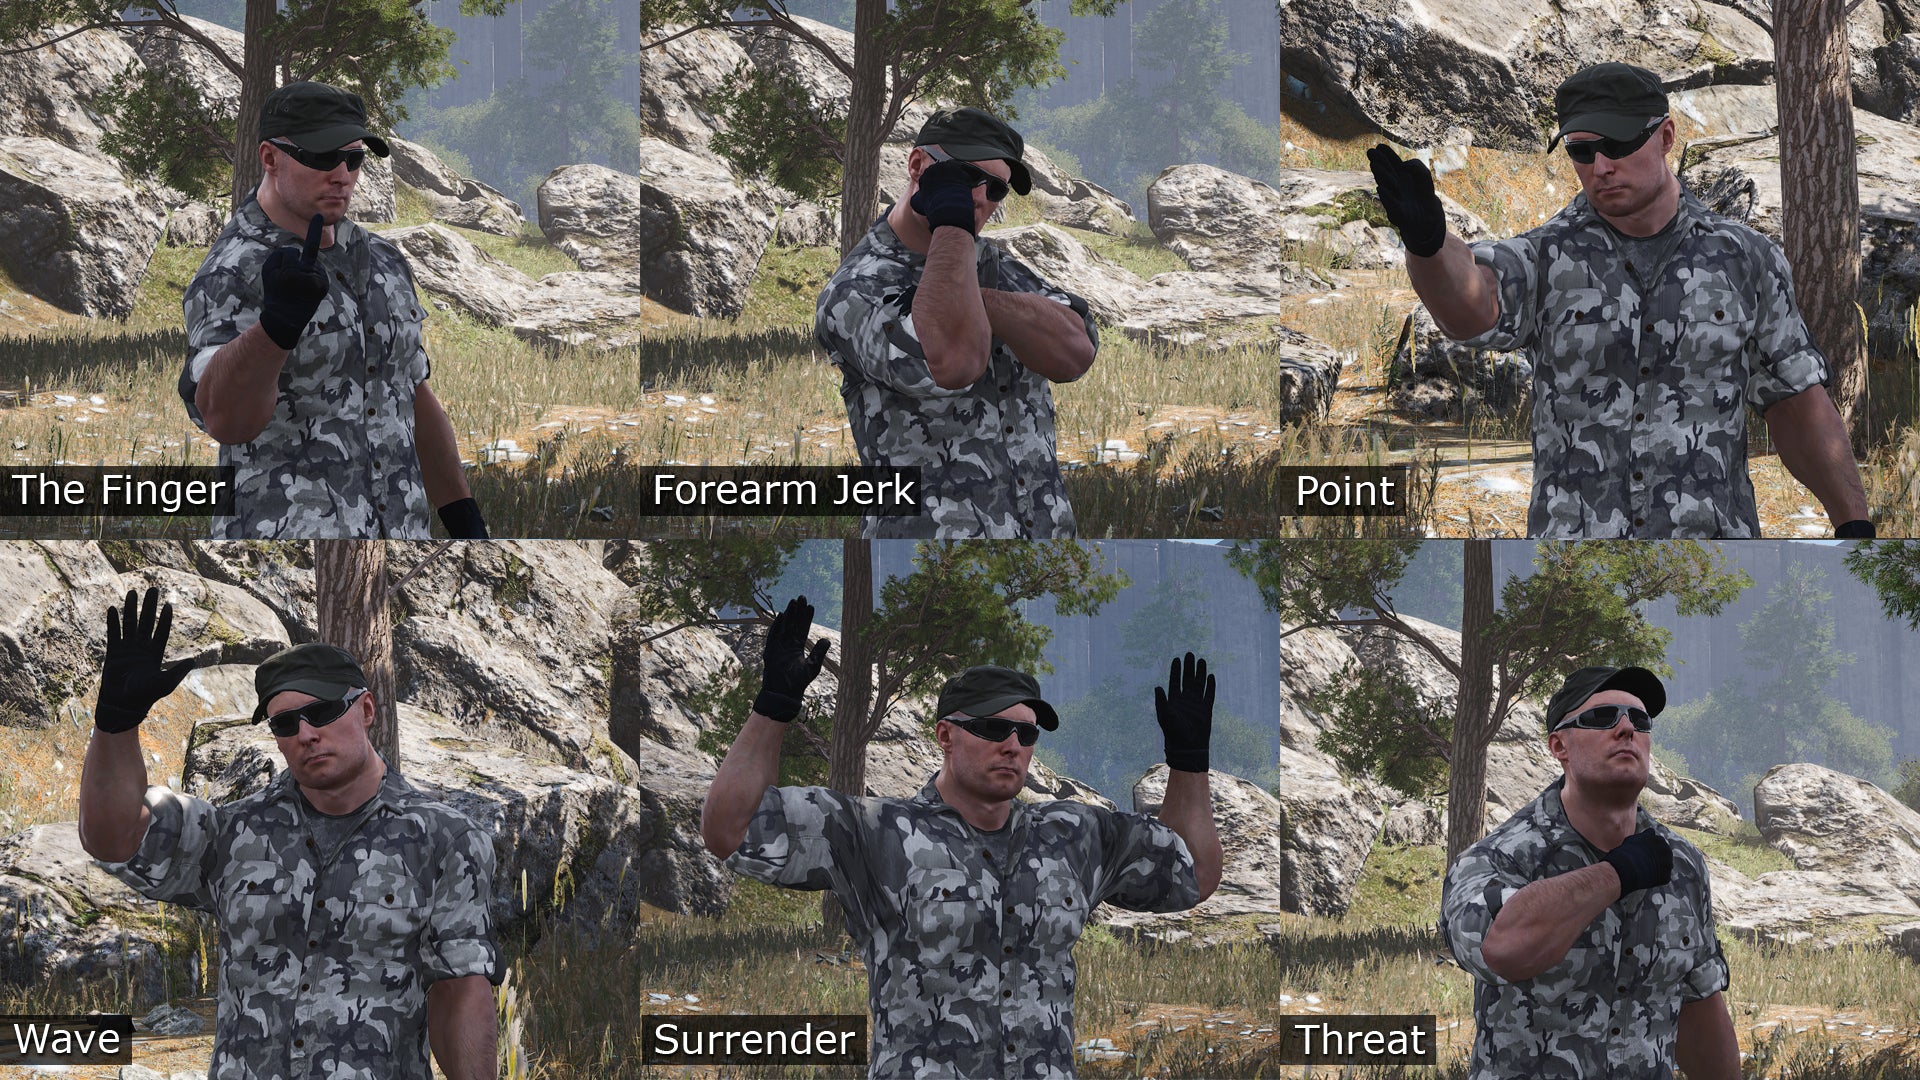 Image for Survival sandbox Scum adds rude gestures, cave networks and human skin masks